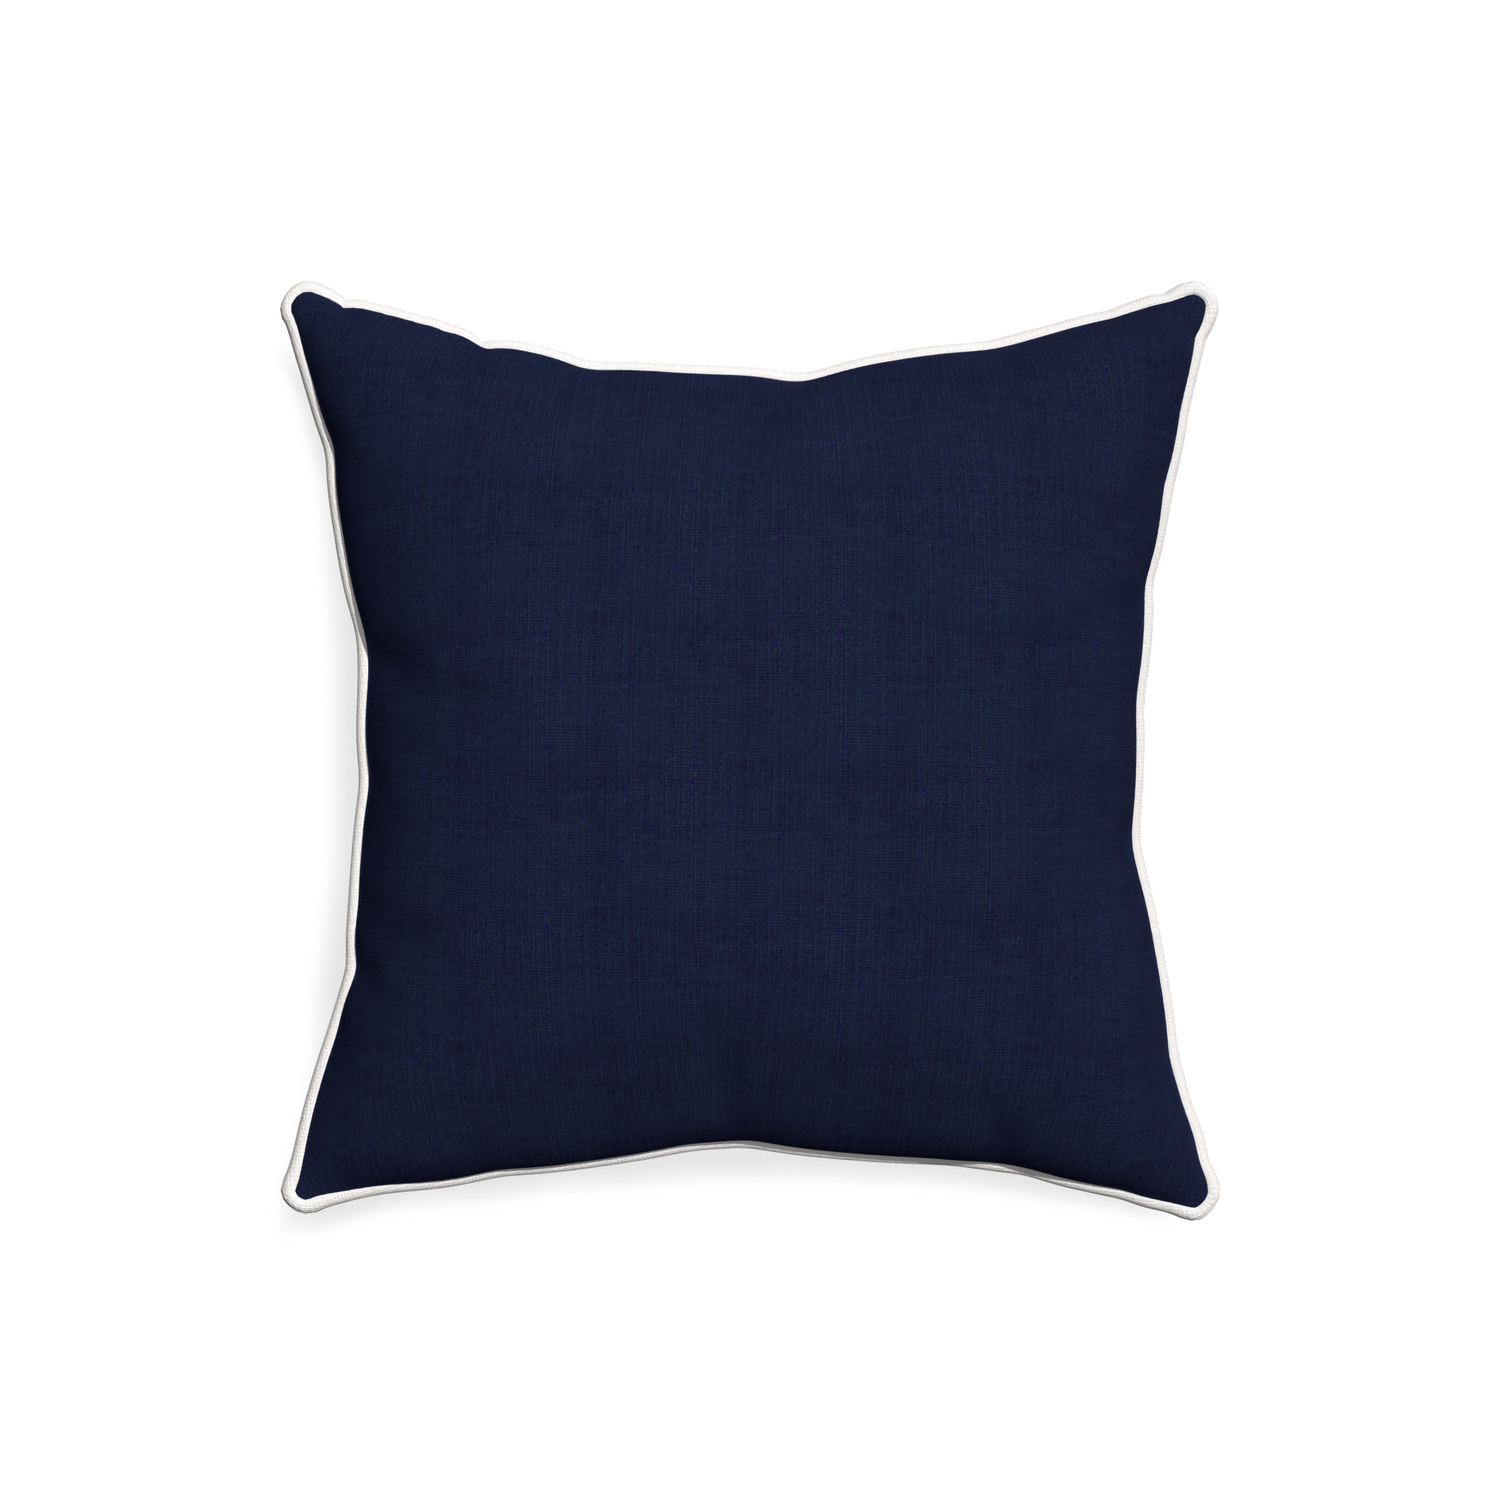 20-square midnight custom pillow with snow piping on white background